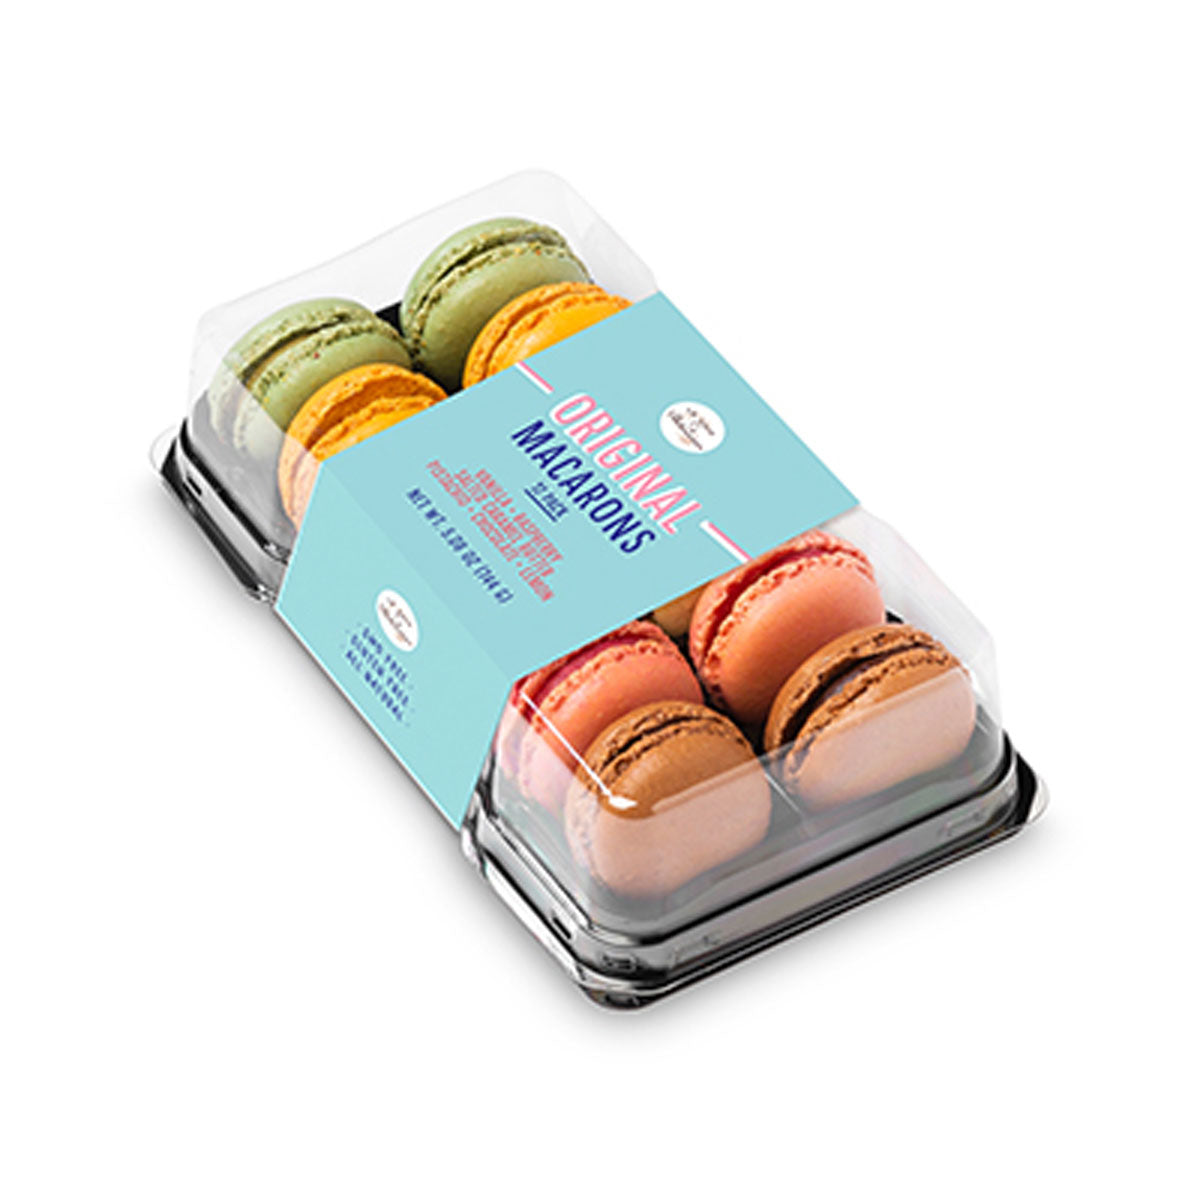 Le Chic Patissier Assorted Macarons 12 CT